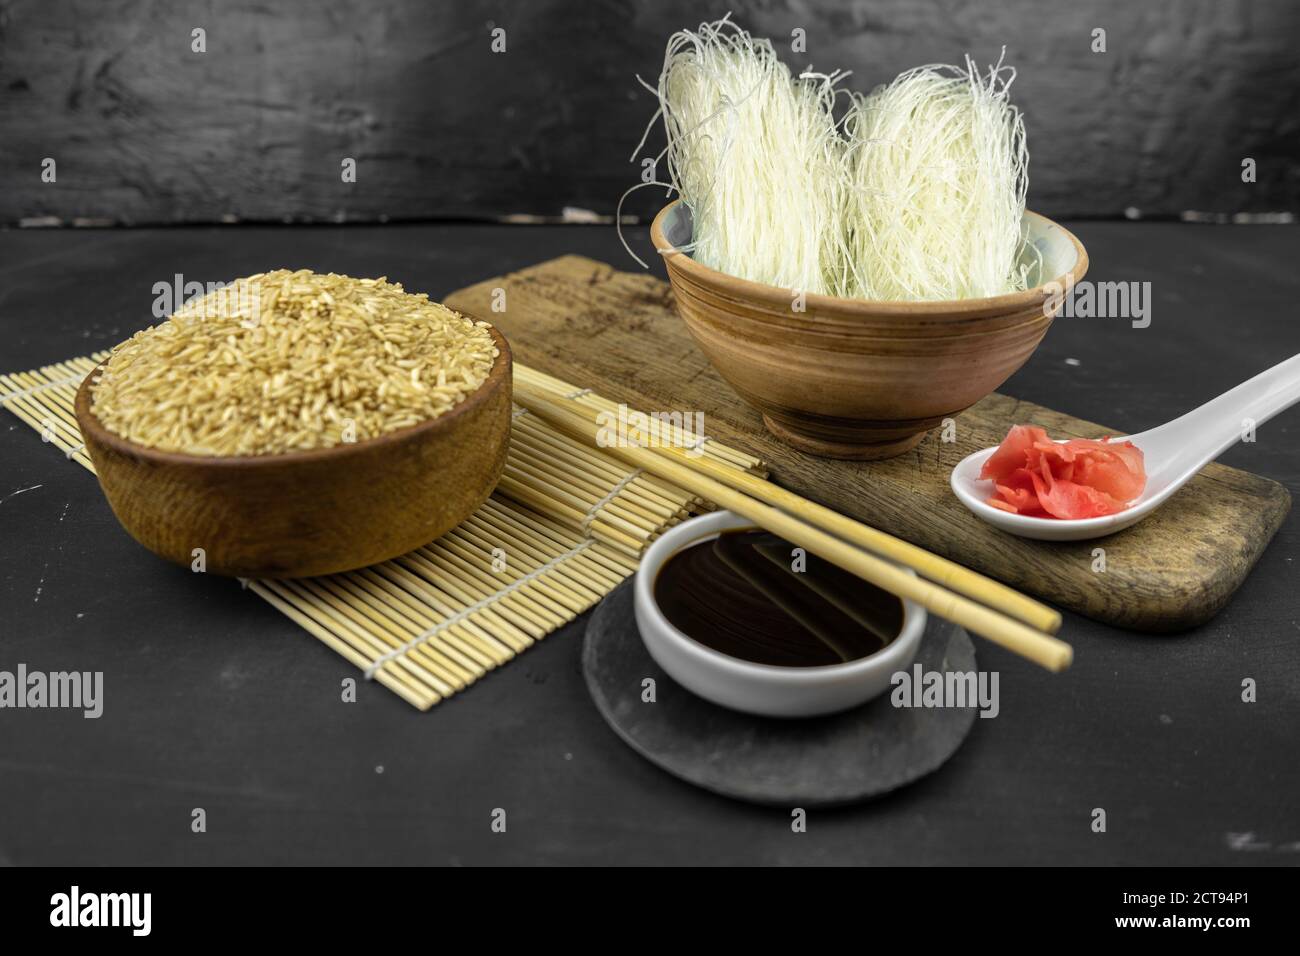 brown rice in a wooden bowl, asian kitchen background with bamboo mat, chopsticks, soy sauce and glass rice noodles on black background Stock Photo